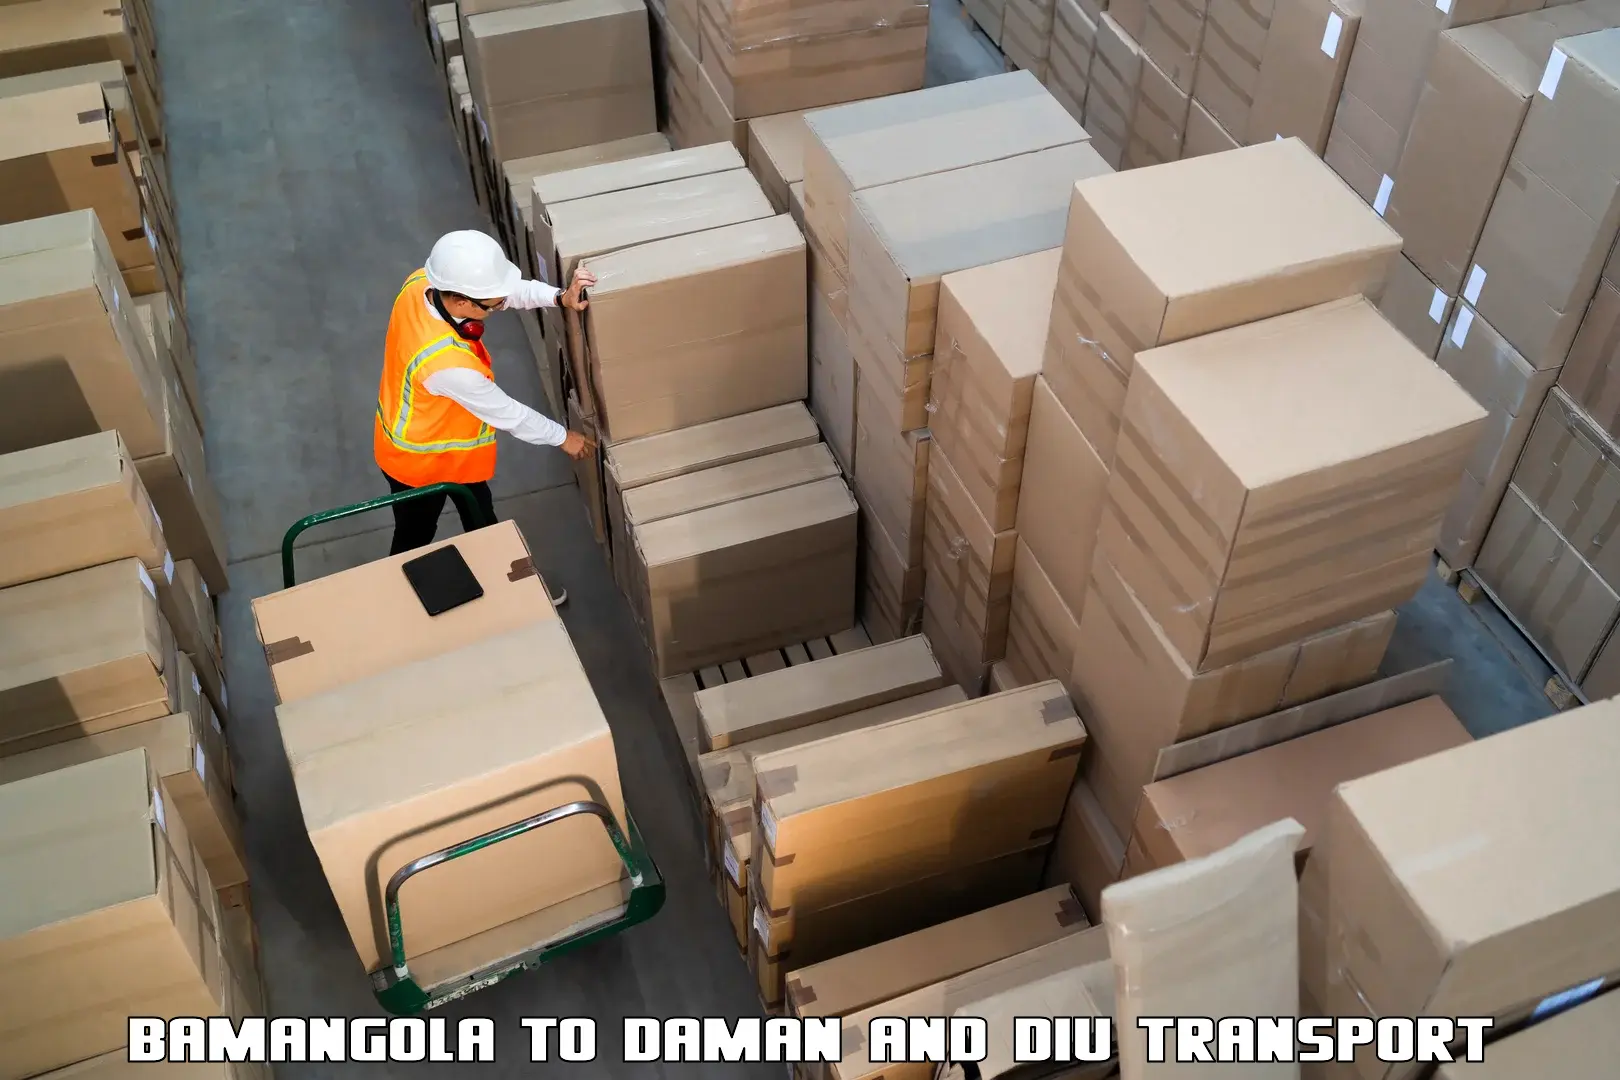 Commercial transport service in Bamangola to Diu